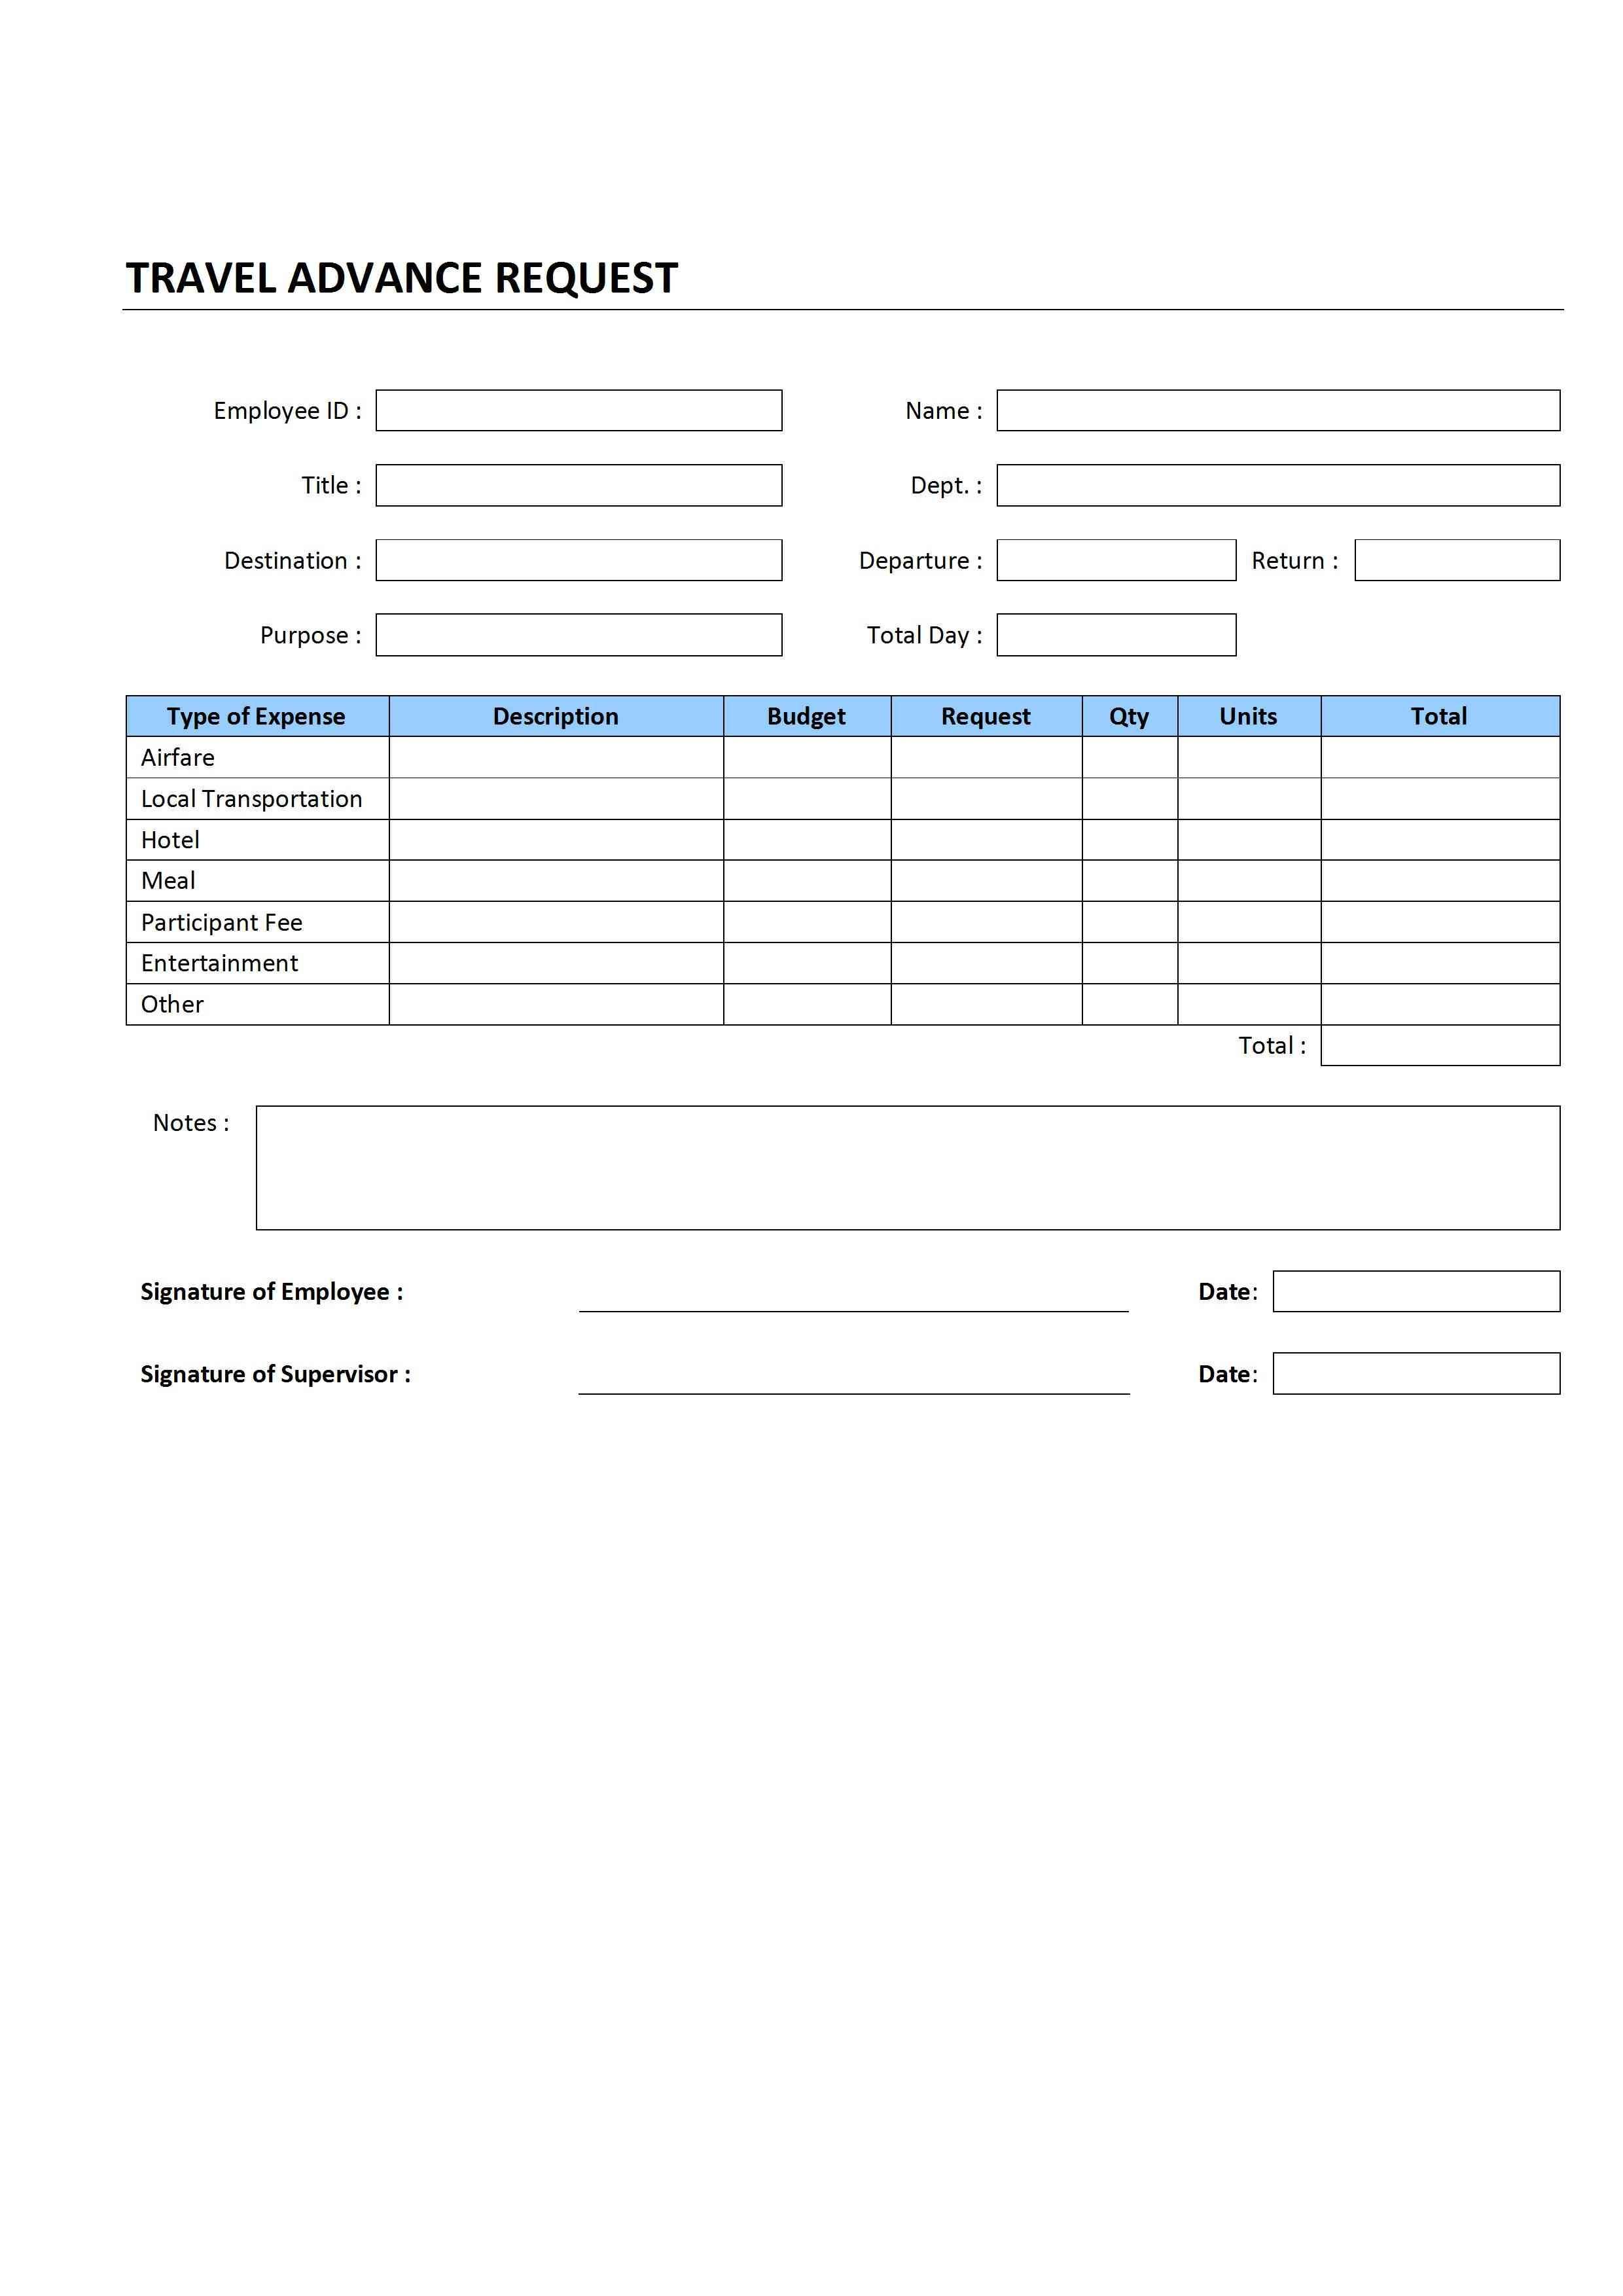 Travel Advance Request with Travel Request Form Template Word